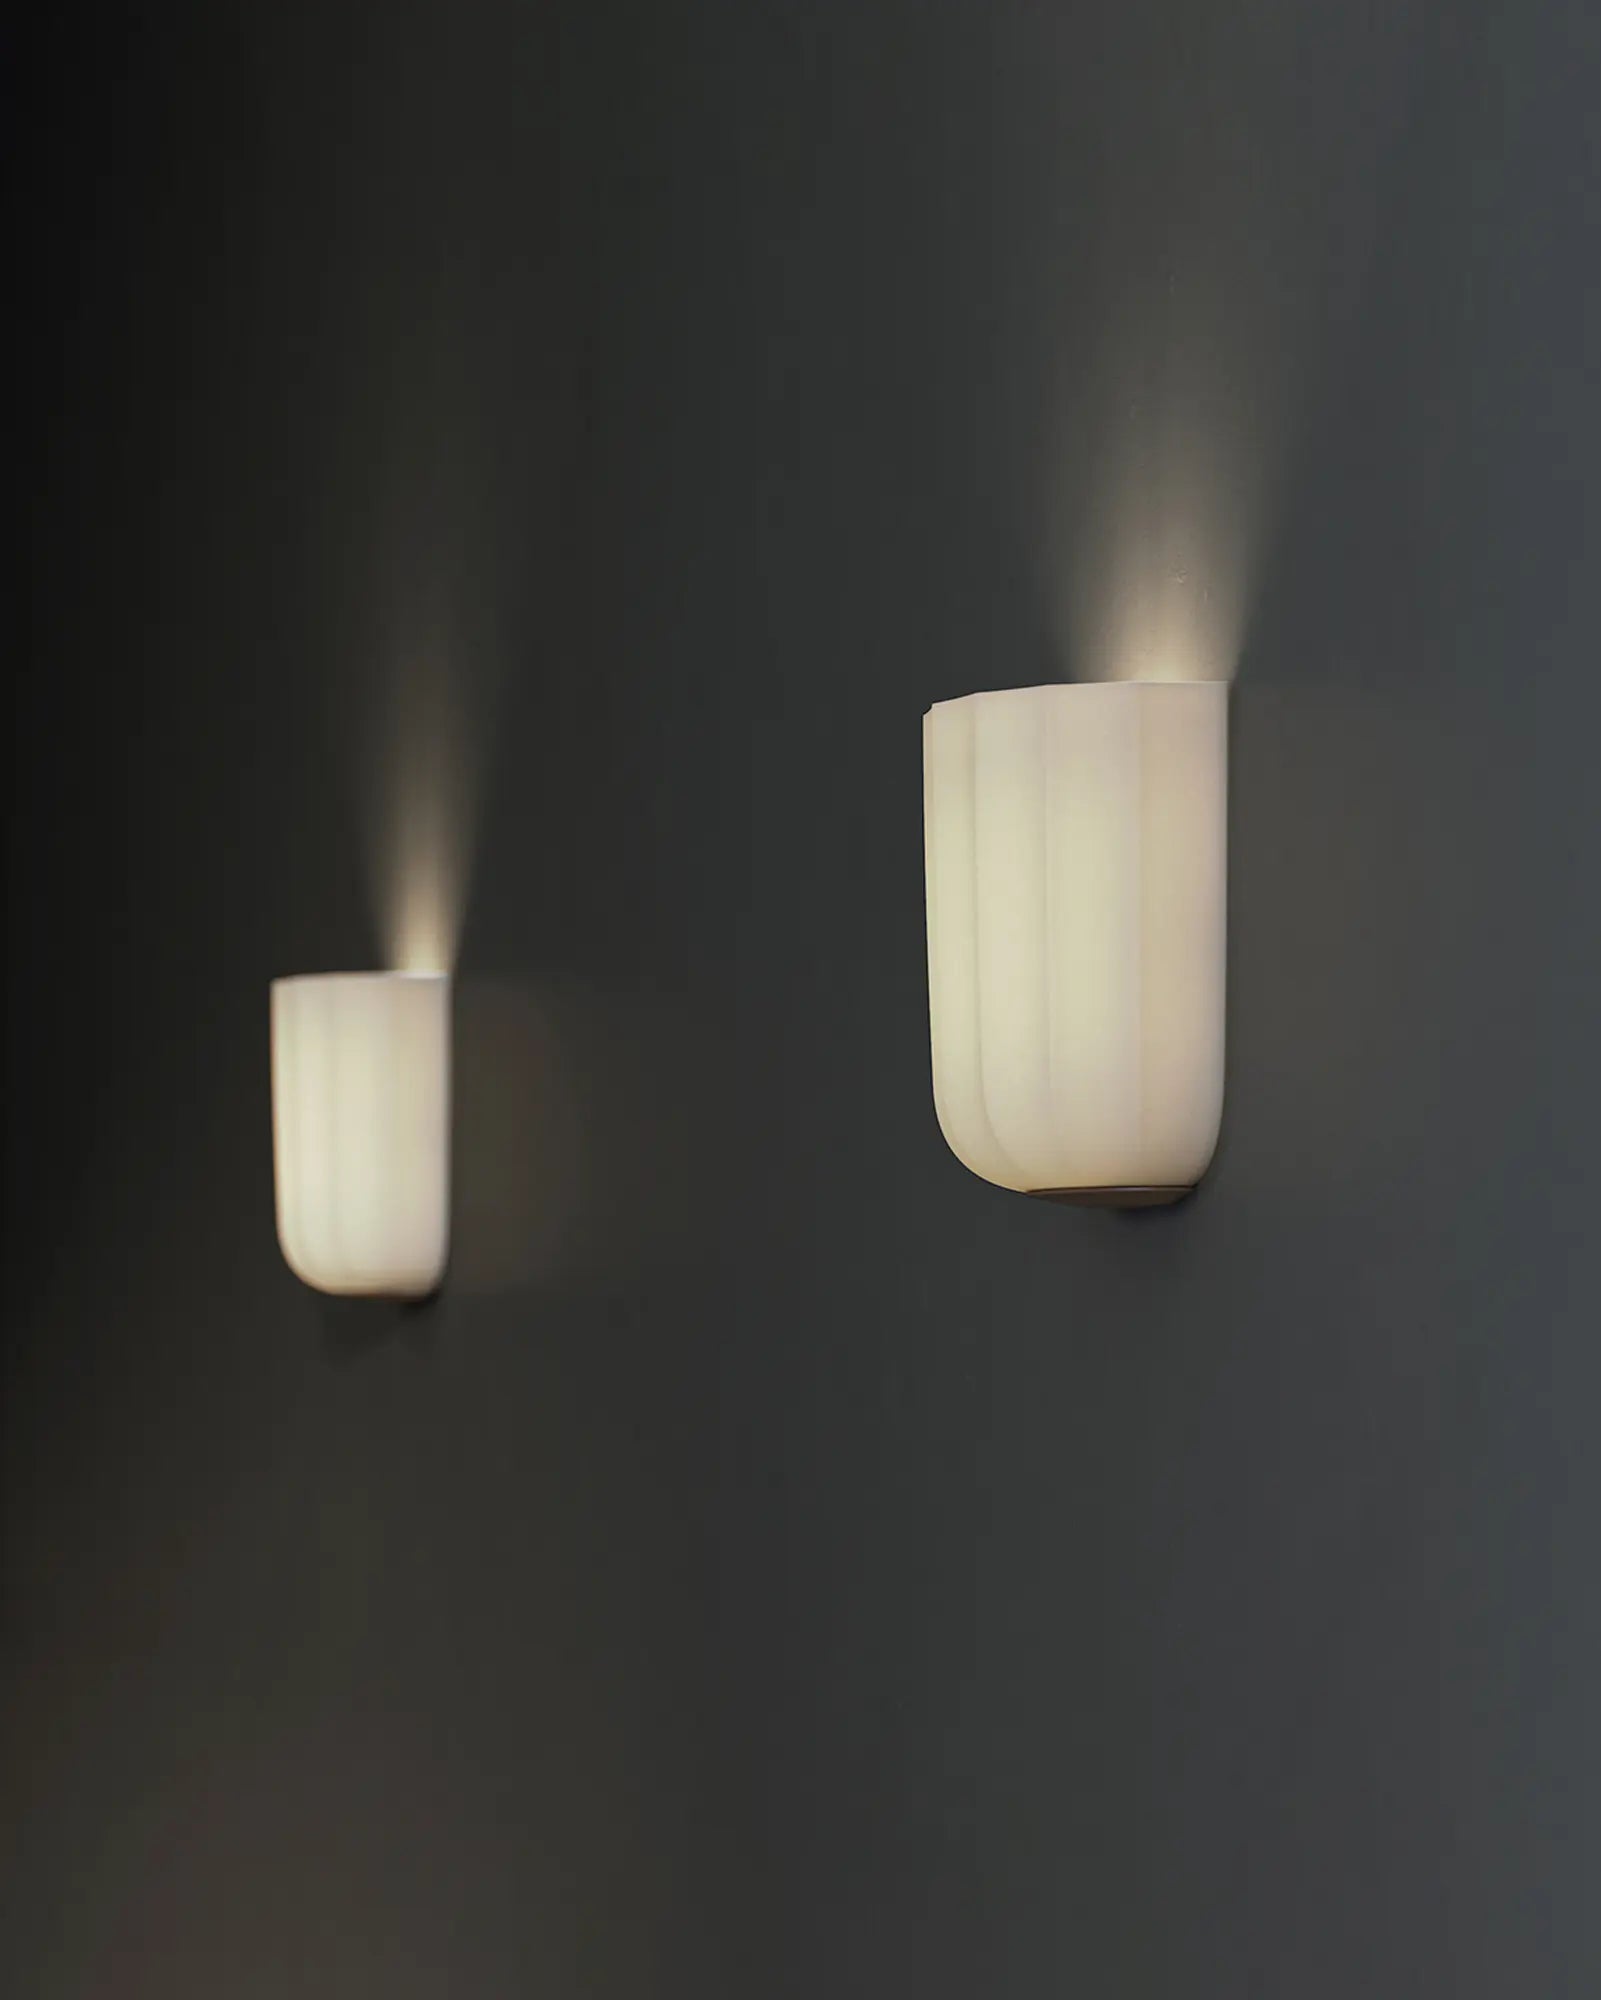 Veo wall light cluster in a hallway